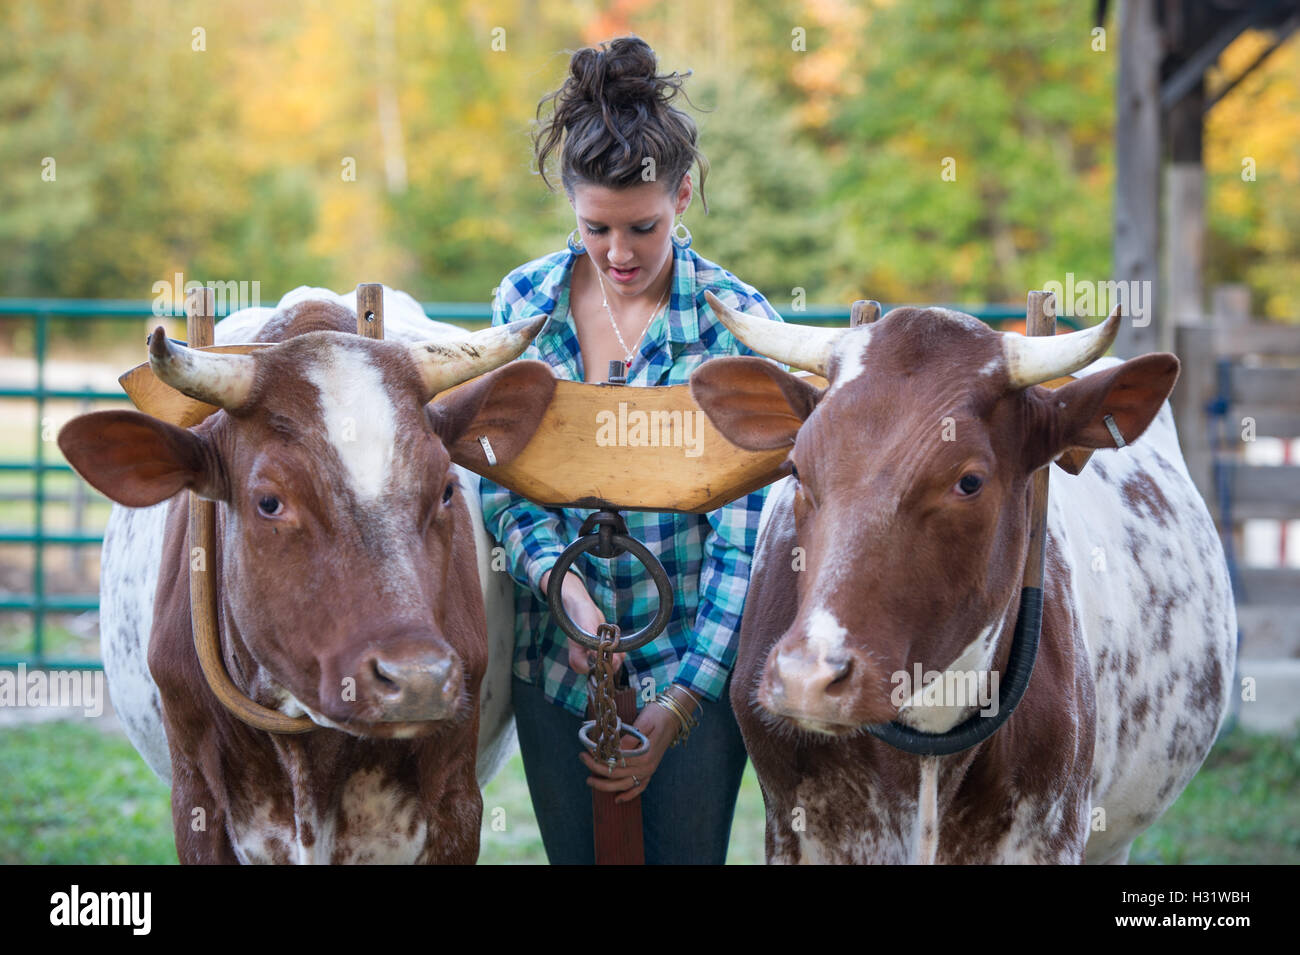 A young woman putting a yoke (or wooden beam) on two oxen on a farm in Gorham, Maine. Stock Photo